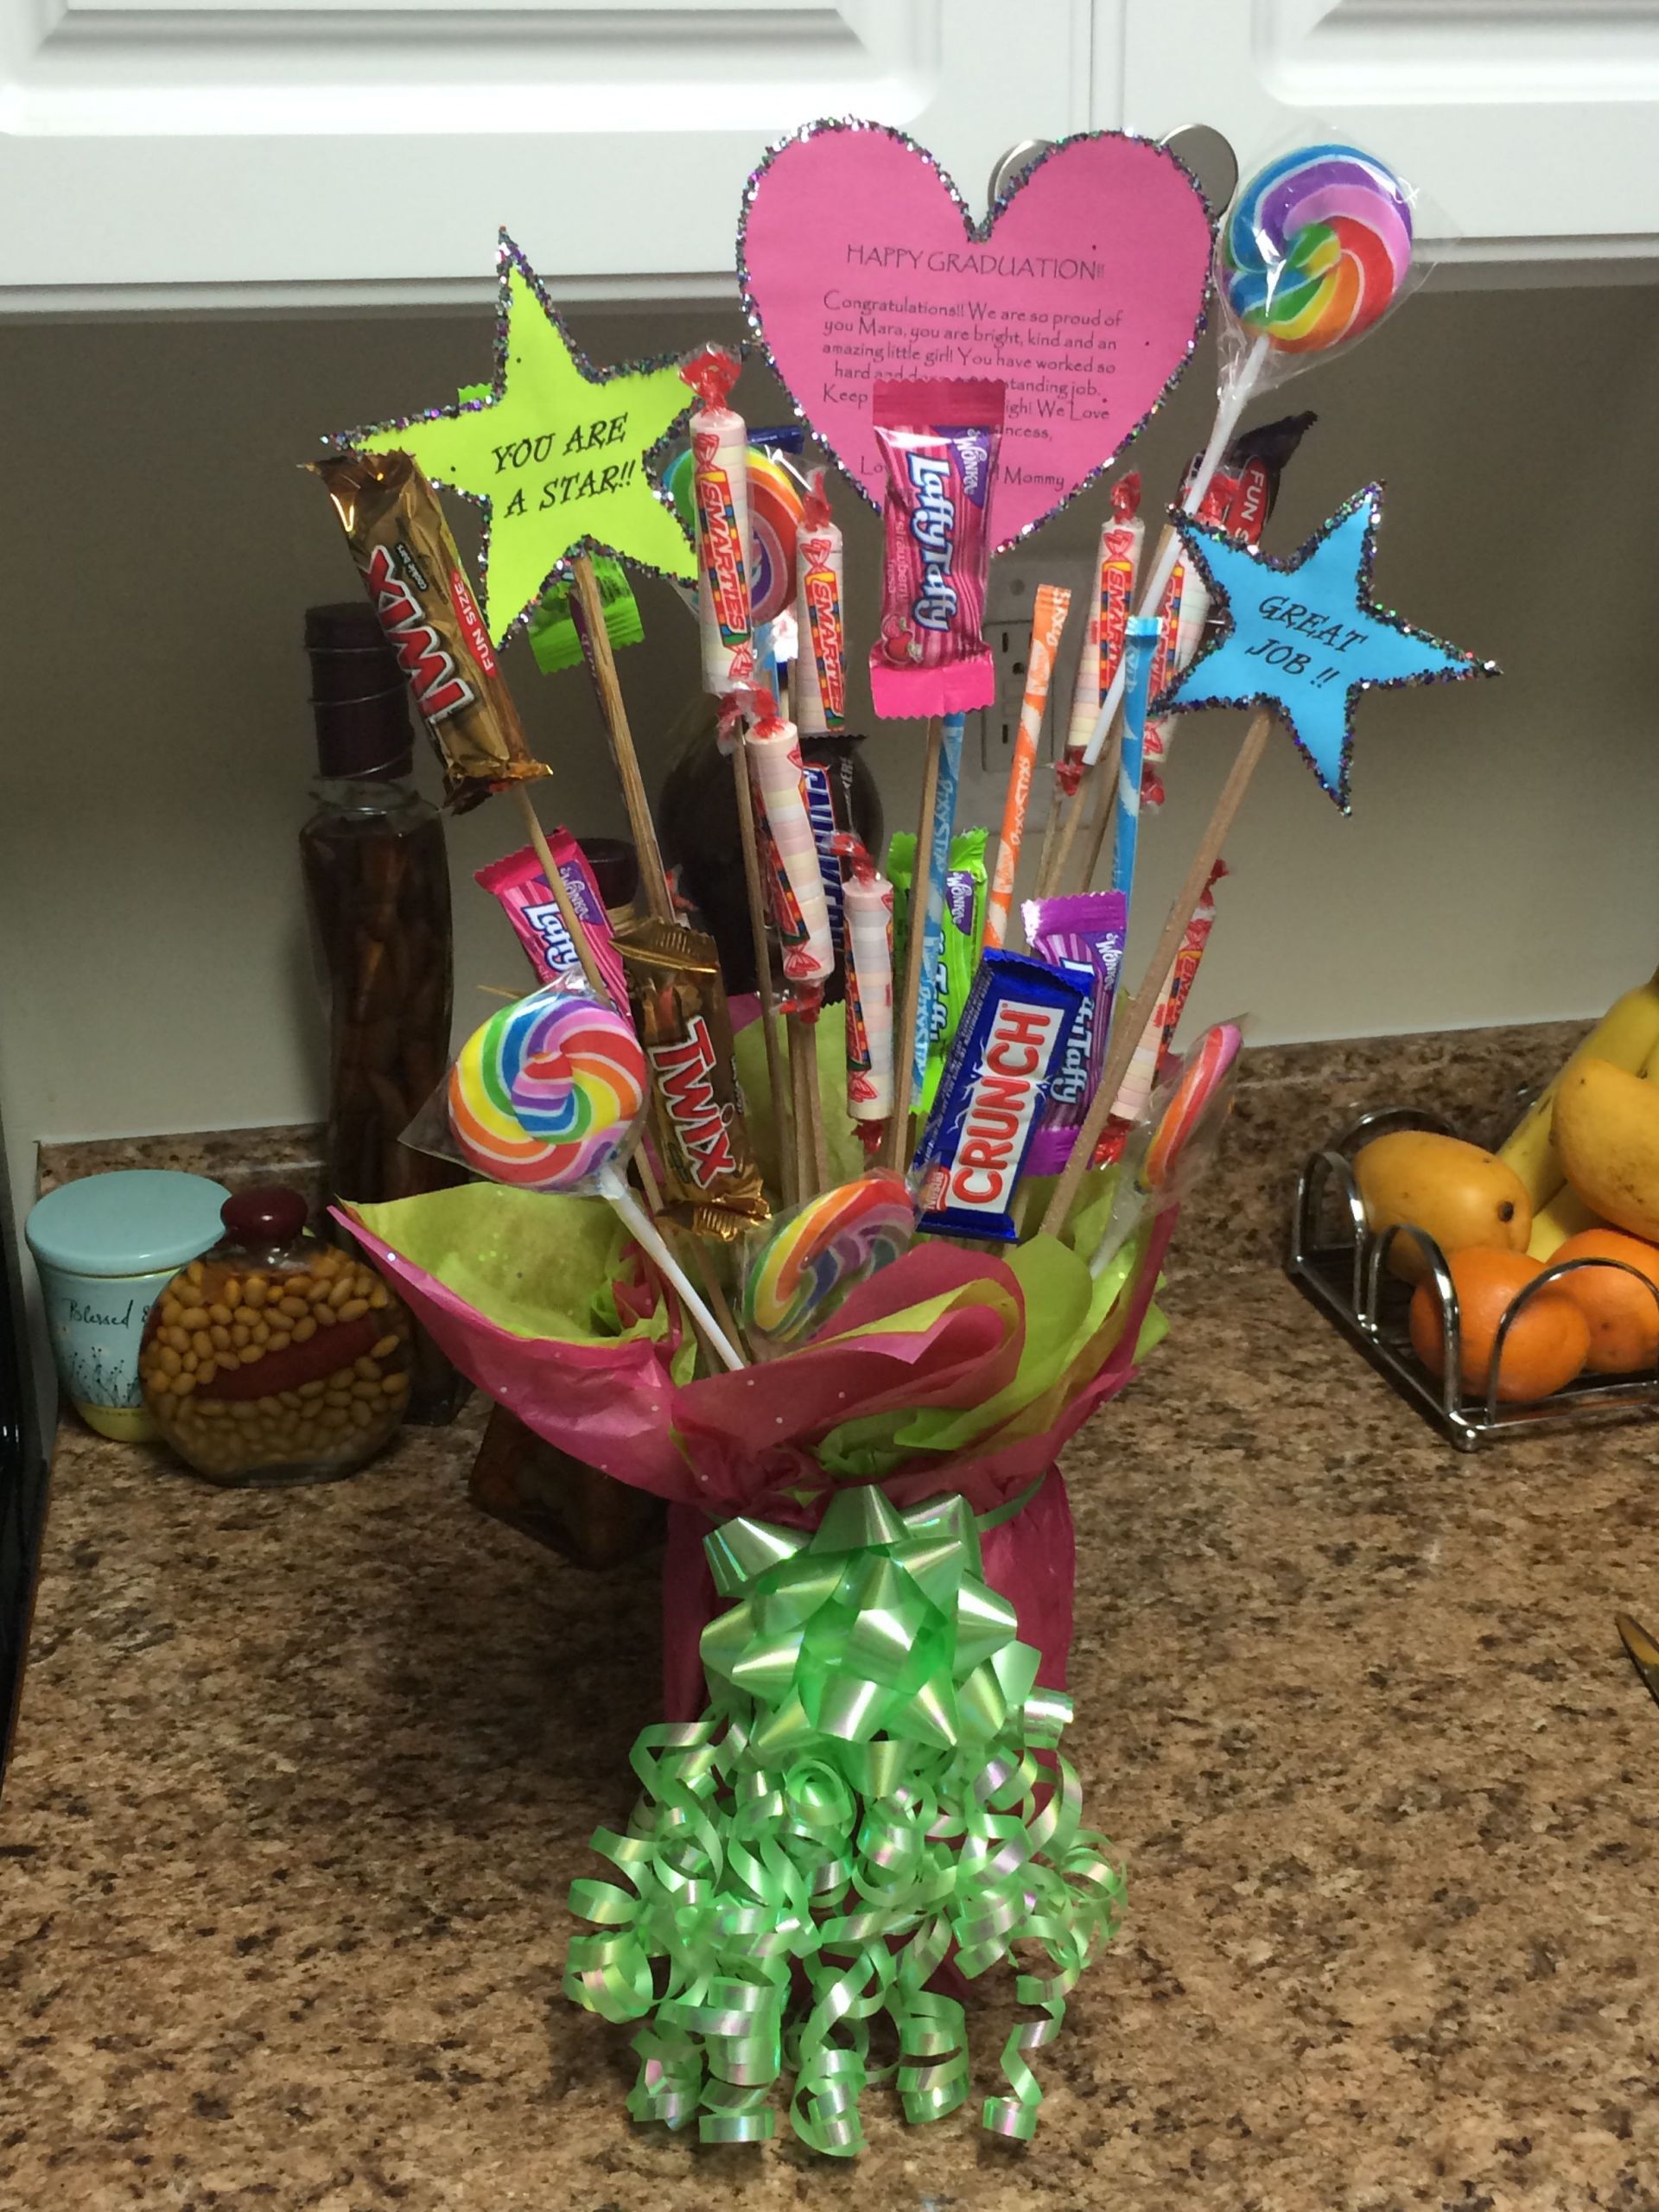 Kindergarten Graduation Gift Ideas For Daughter
 This is a t bouquet I made for my daughter s 5th grade